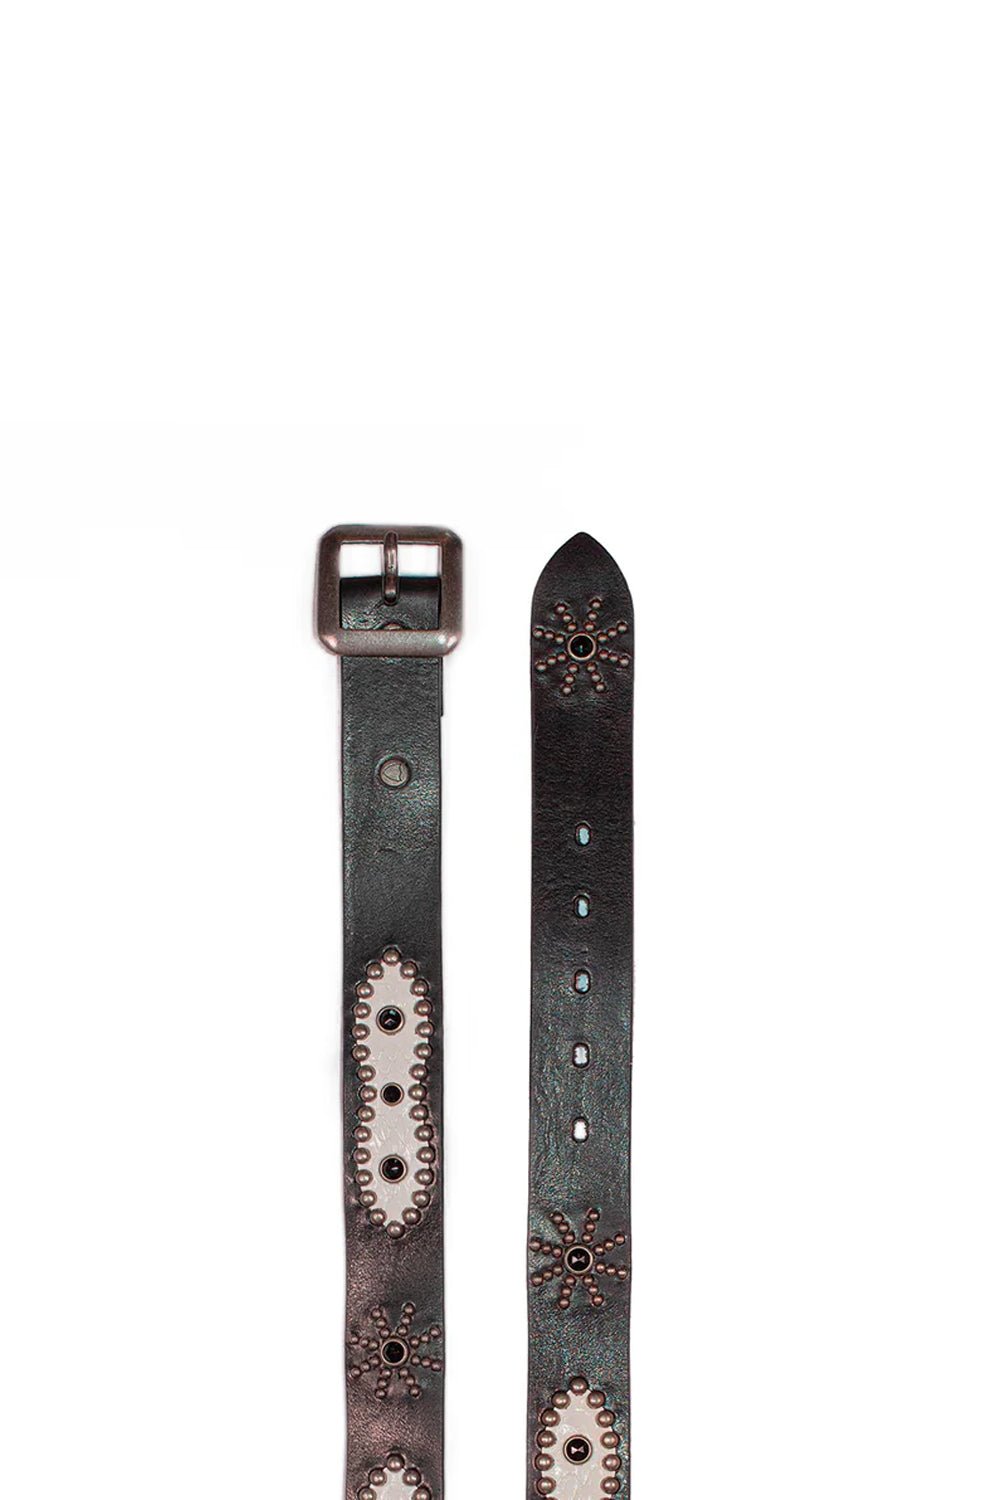 MARLENA BELT Black leather belt with studs and rhinestones. Squared buckle. Height: 3,5 cm. Made in Italy. HTC LOS ANGELES